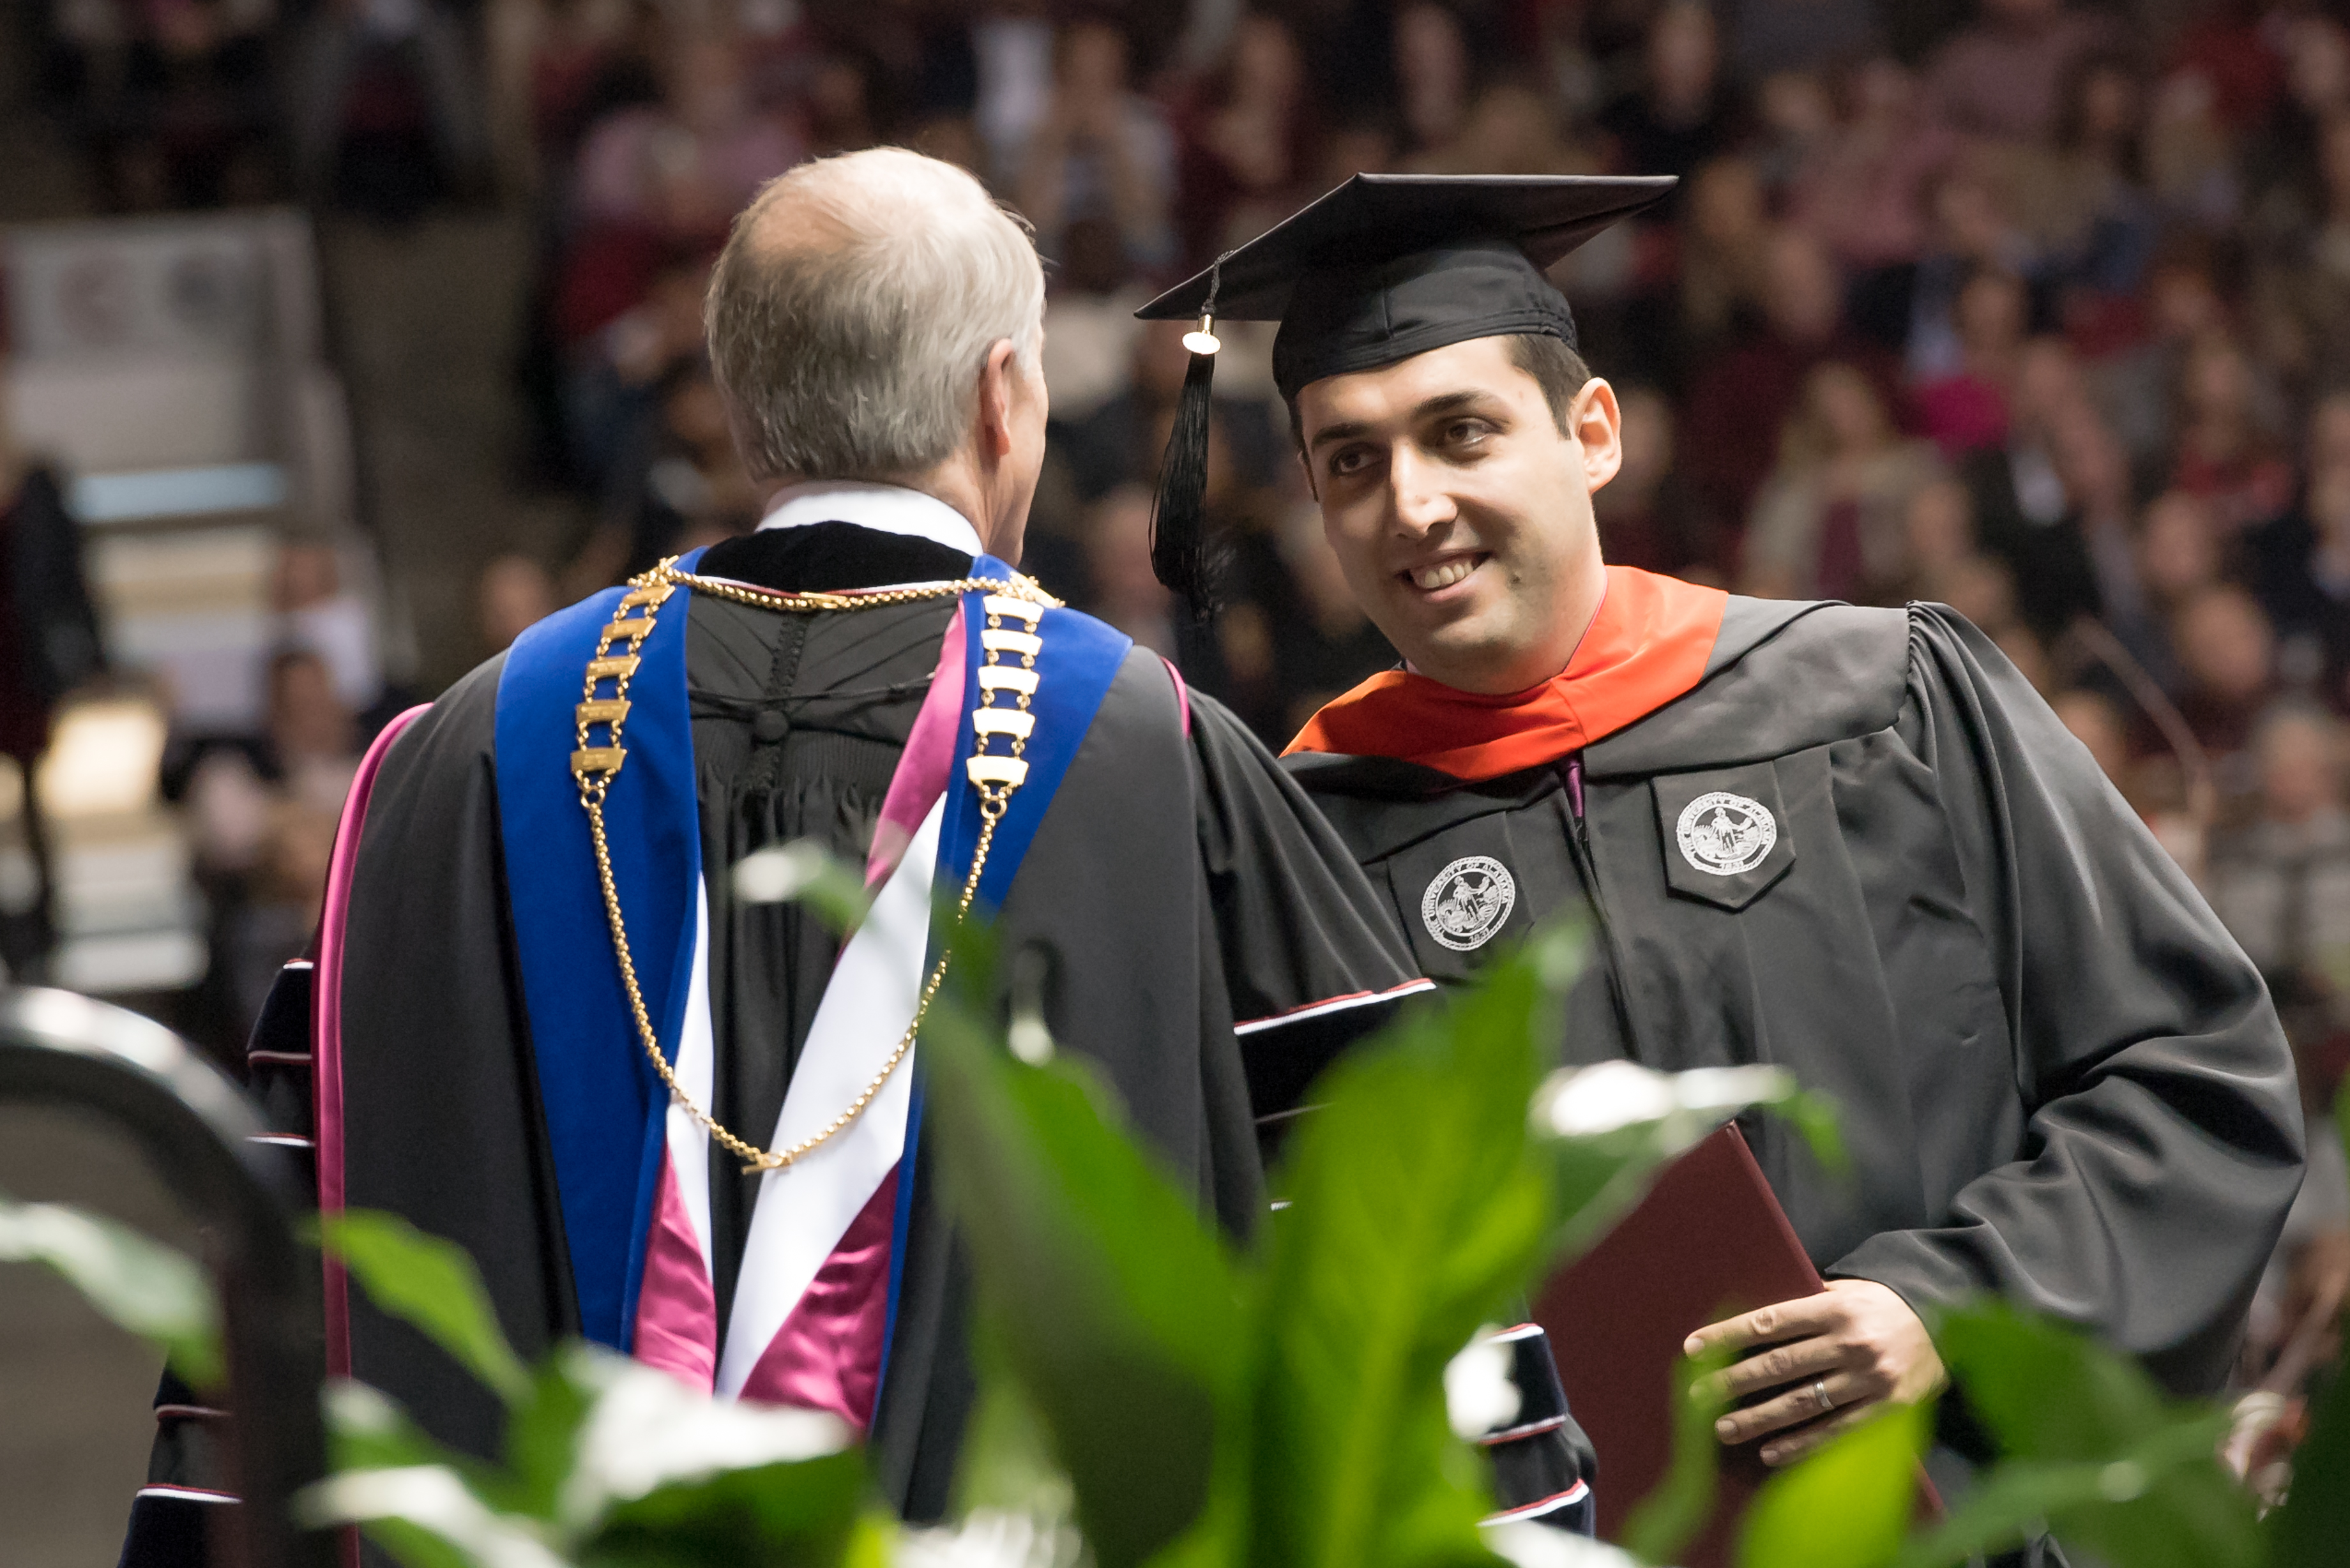 UA to Hold Spring Commencement Exercises May 4-6